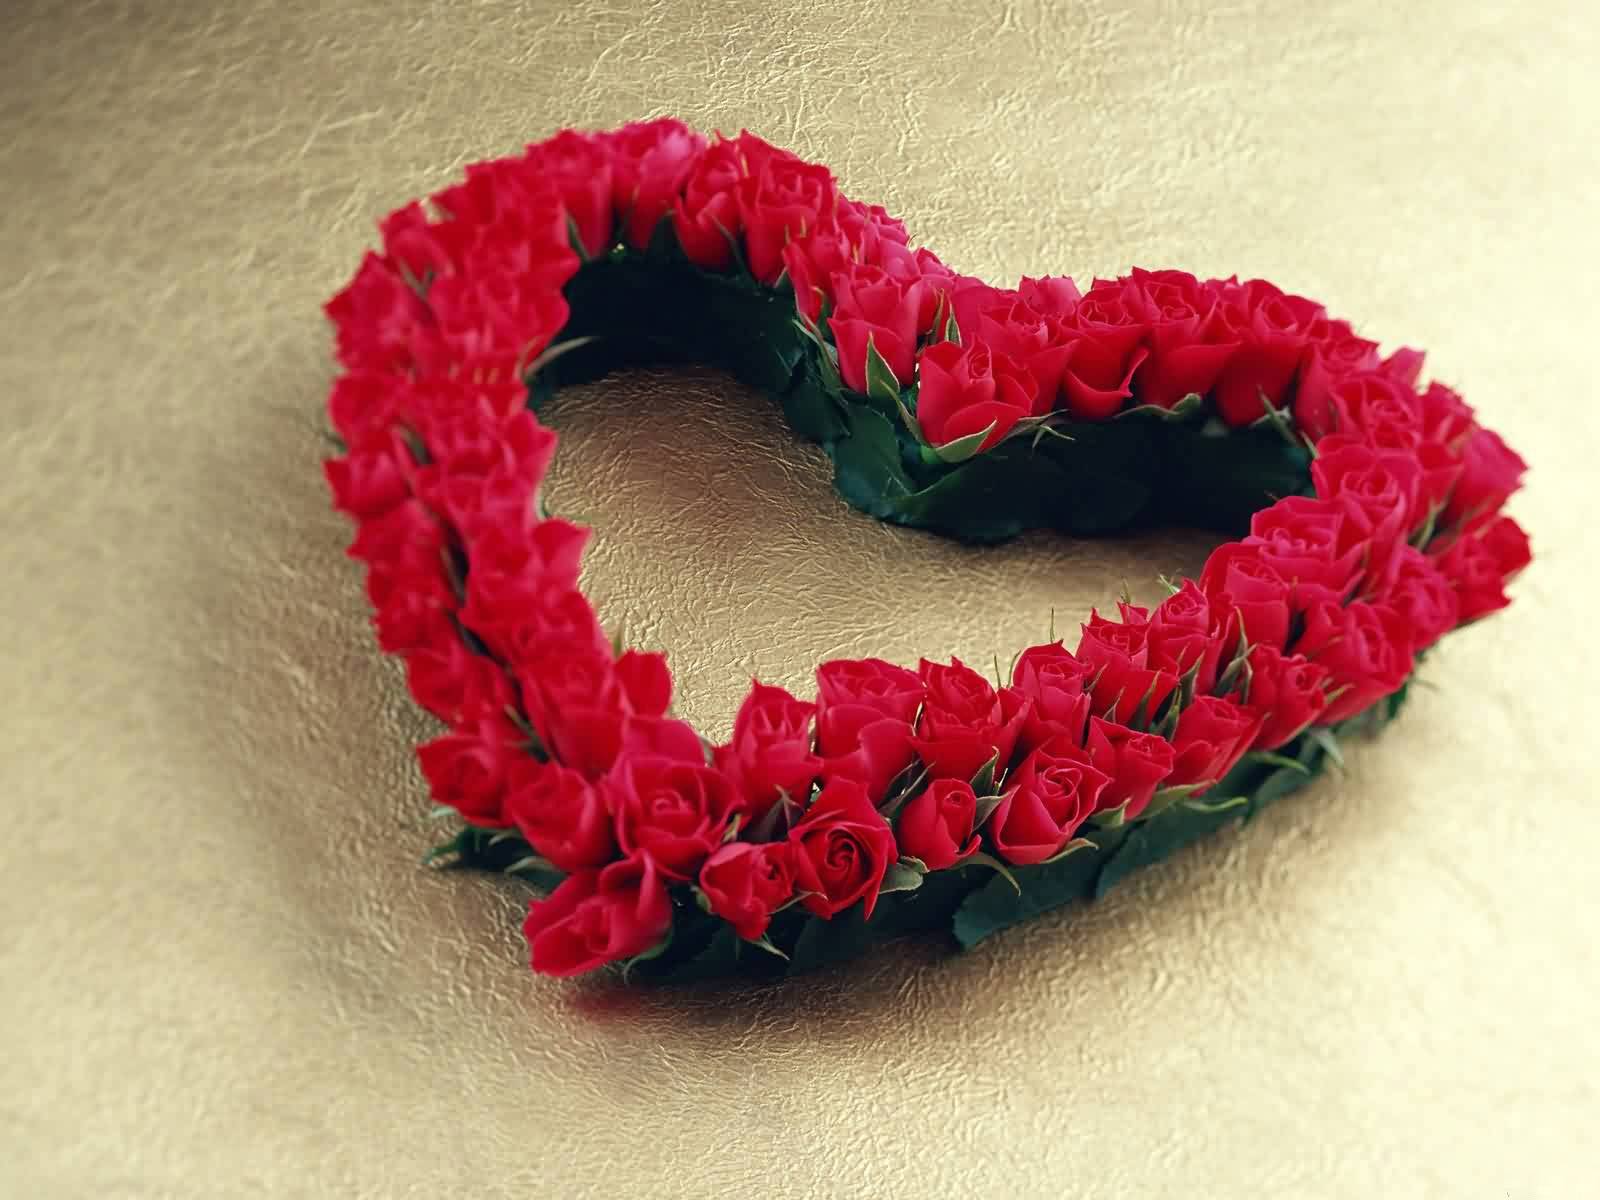 Red Hearts With Roses Image & Picture